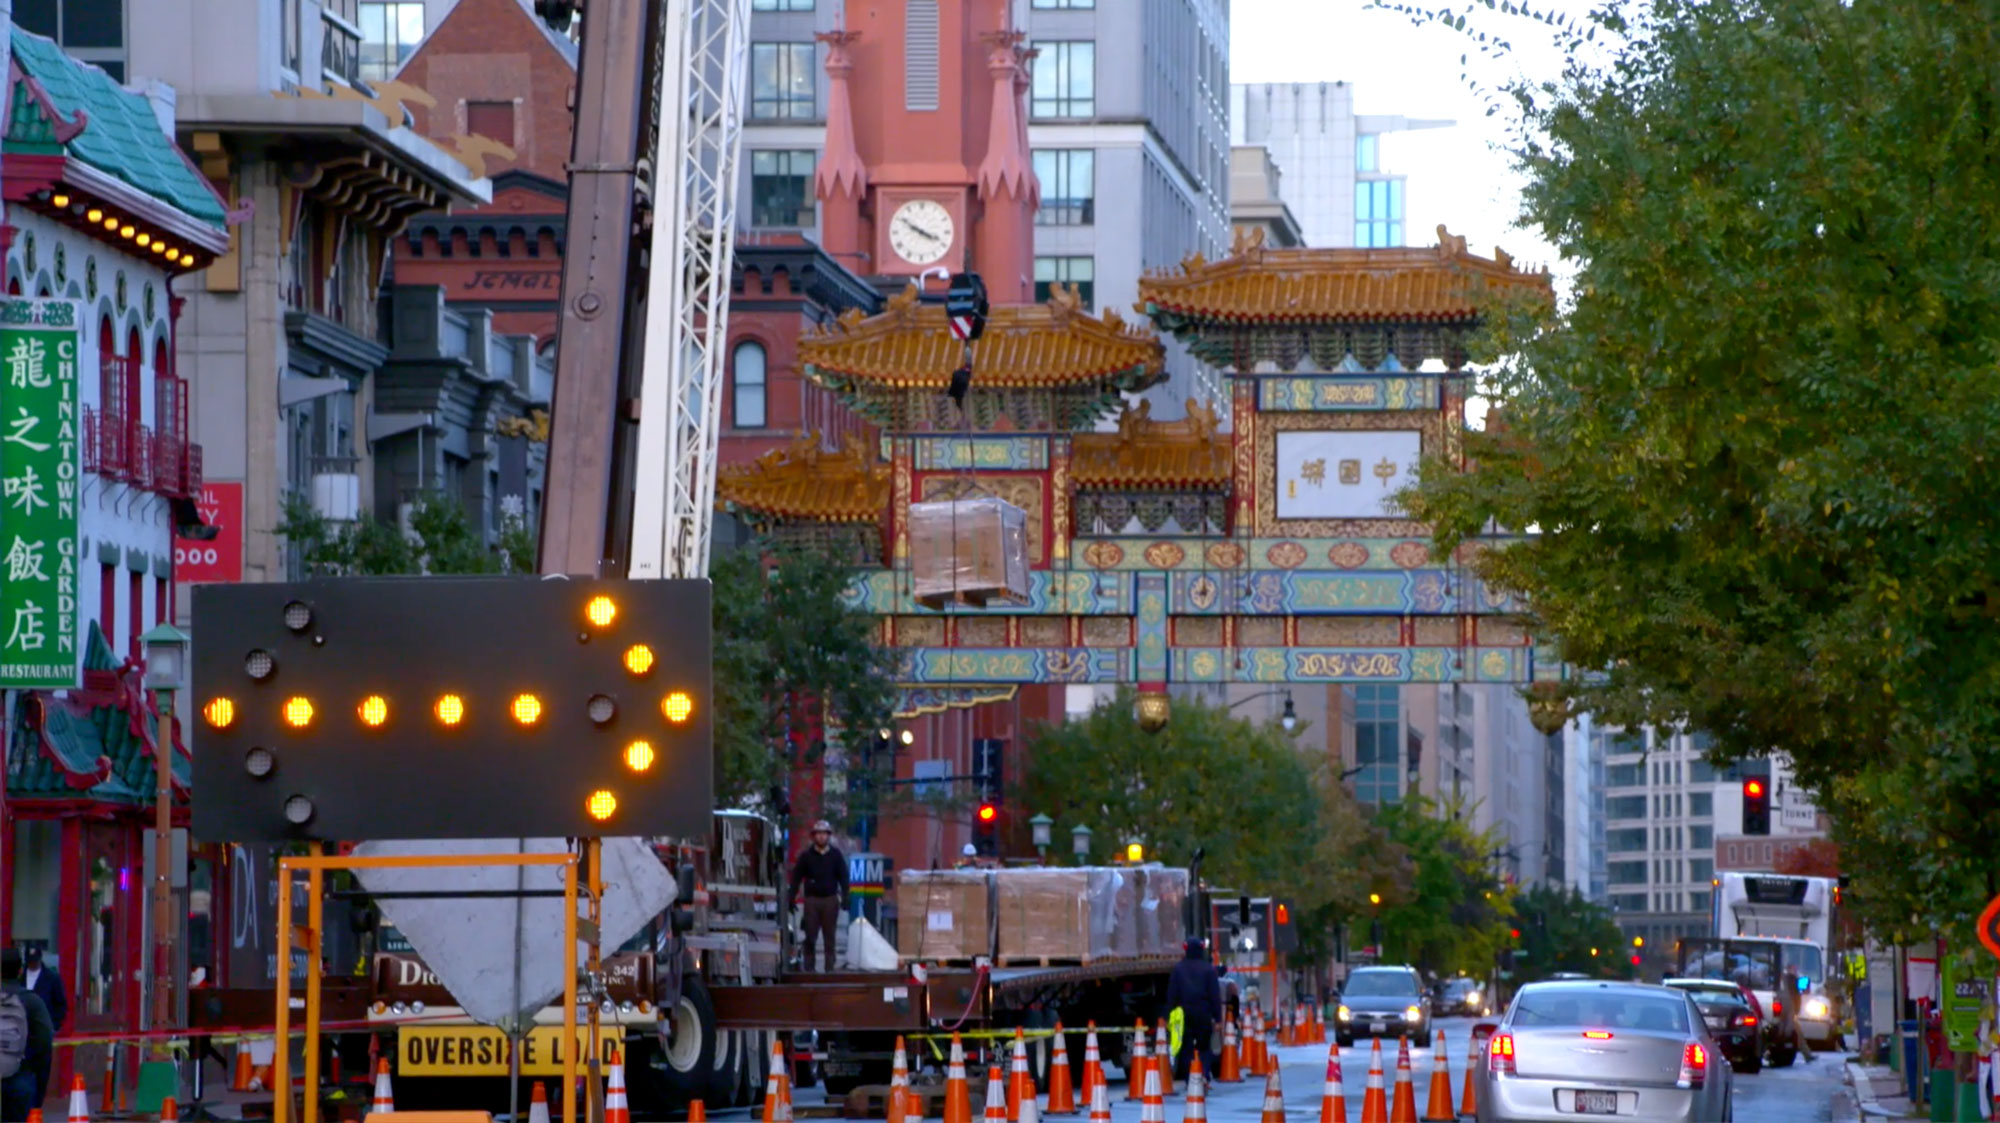 A neon construction arrow sign points right in front of a crane. The sign and crane are outside in front of a Chinatown community gate with many orange cones surrounding the crane. A sign to the left says 'Chinatown Garden Restaurant' and beyond the gate is a clock tower with four conical small towers surrounding the actual clock, and glass-paned buildings are behind the Chinatown community gate. There are cars on the road and trees lining the streets. The sky is bright with no outlines of clouds.